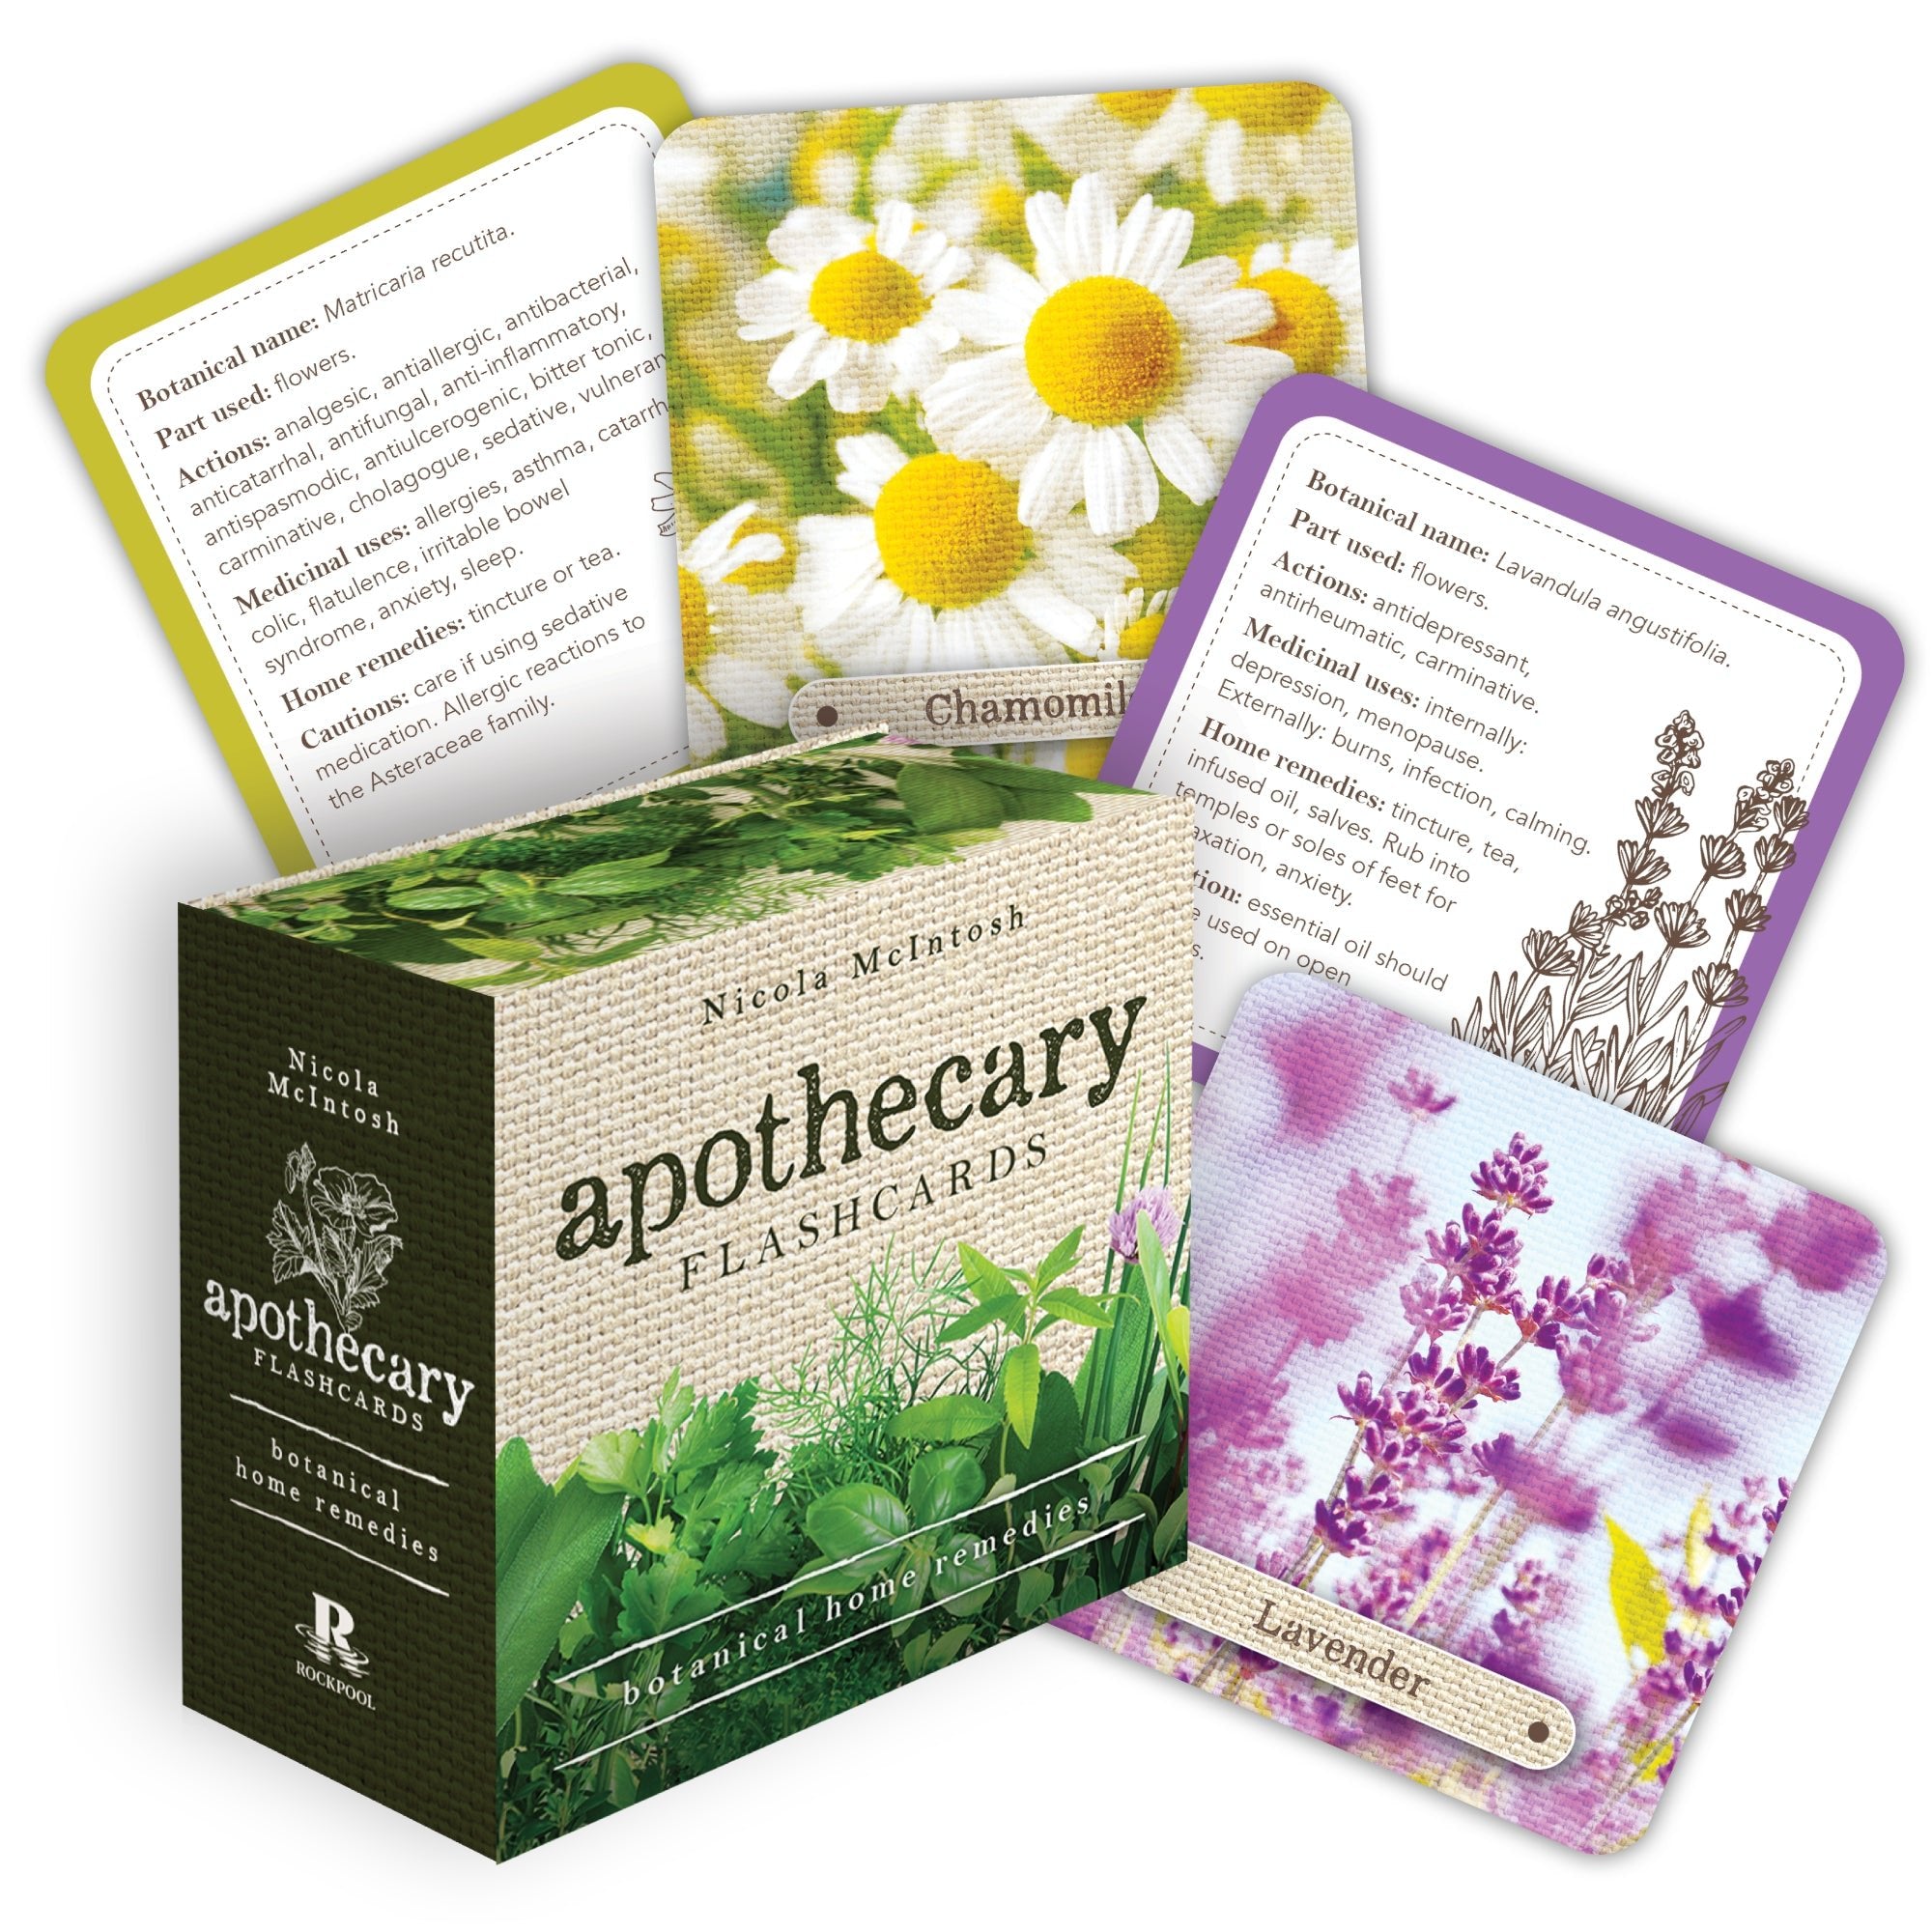 Apothecary Flashcards - 13 Moons